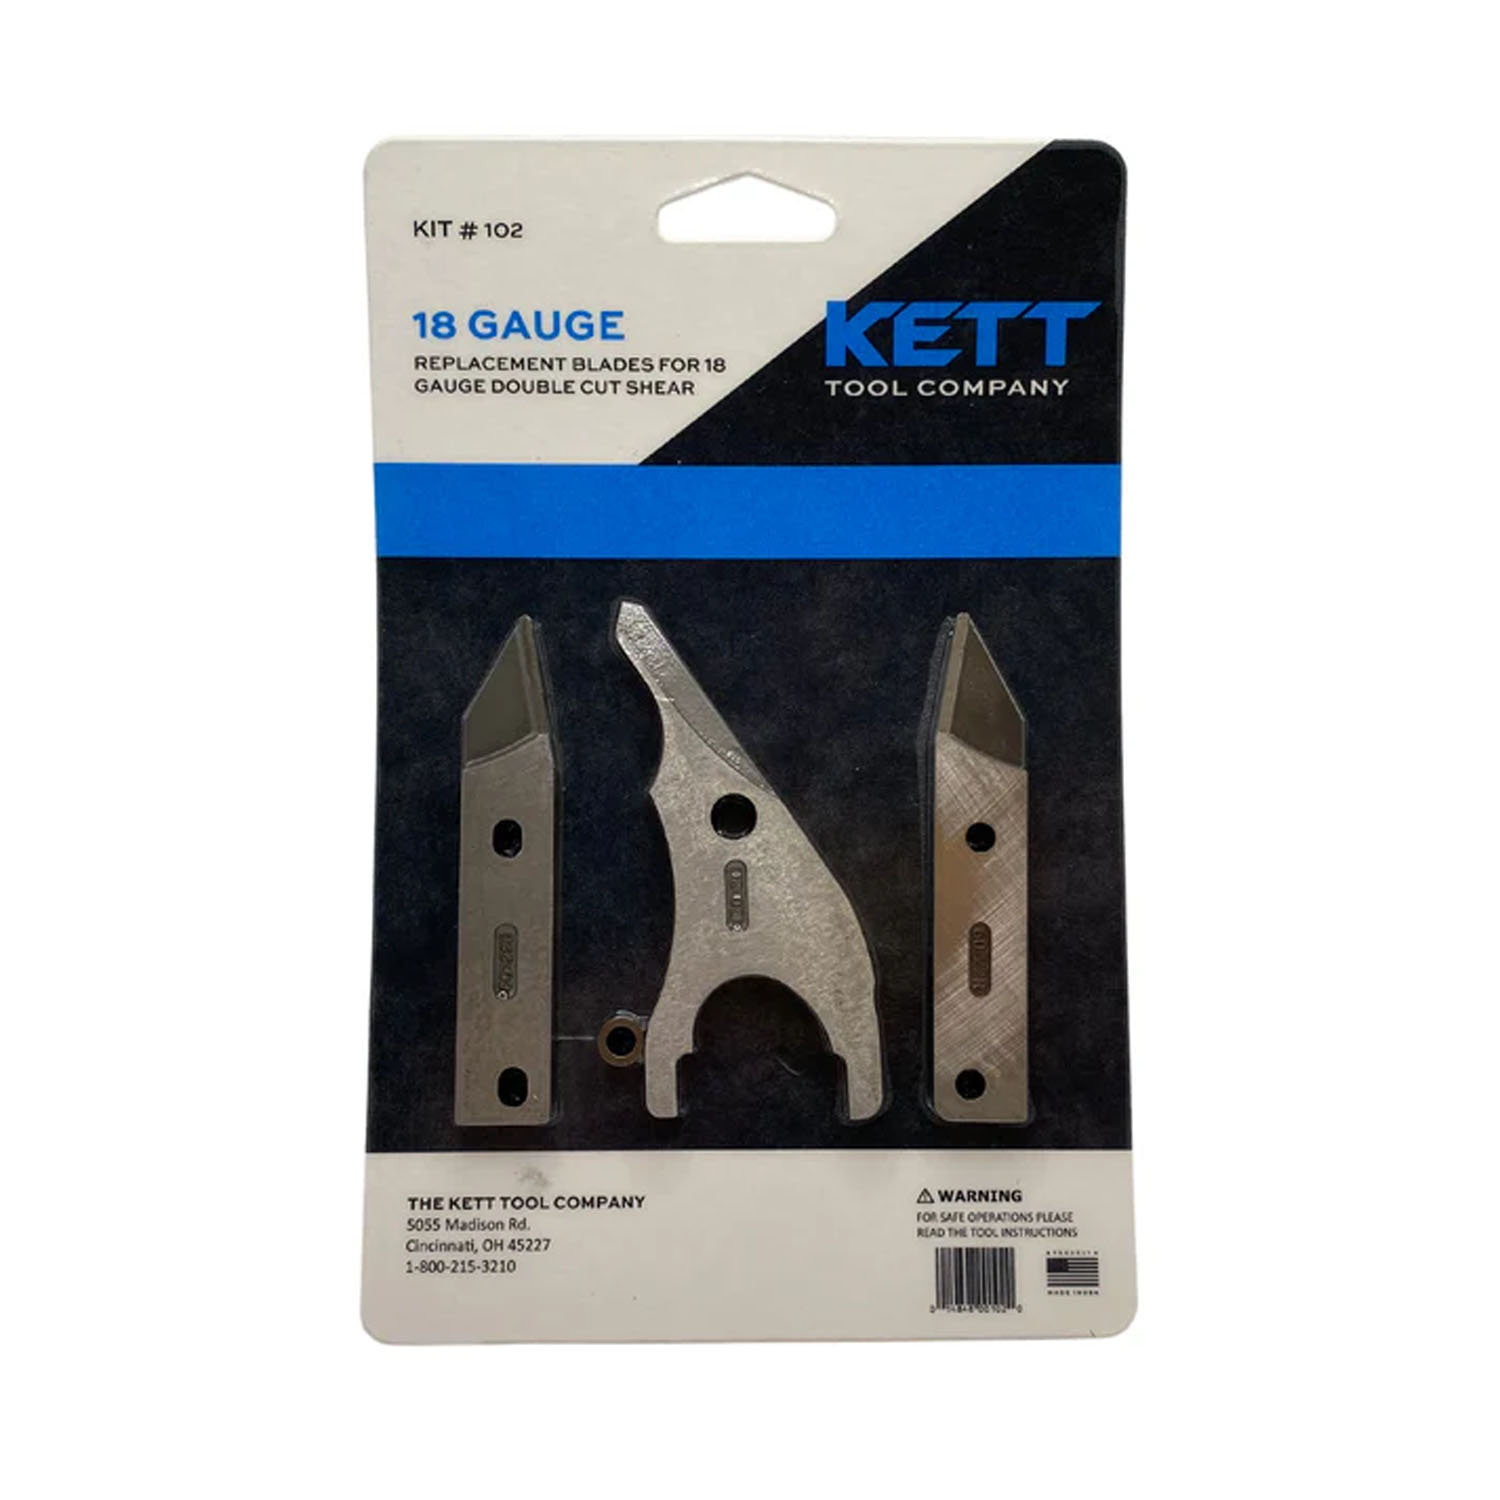 REPLACEMENT BLADES FOR 18 GUAGE DOUBLE CUT SHEARS